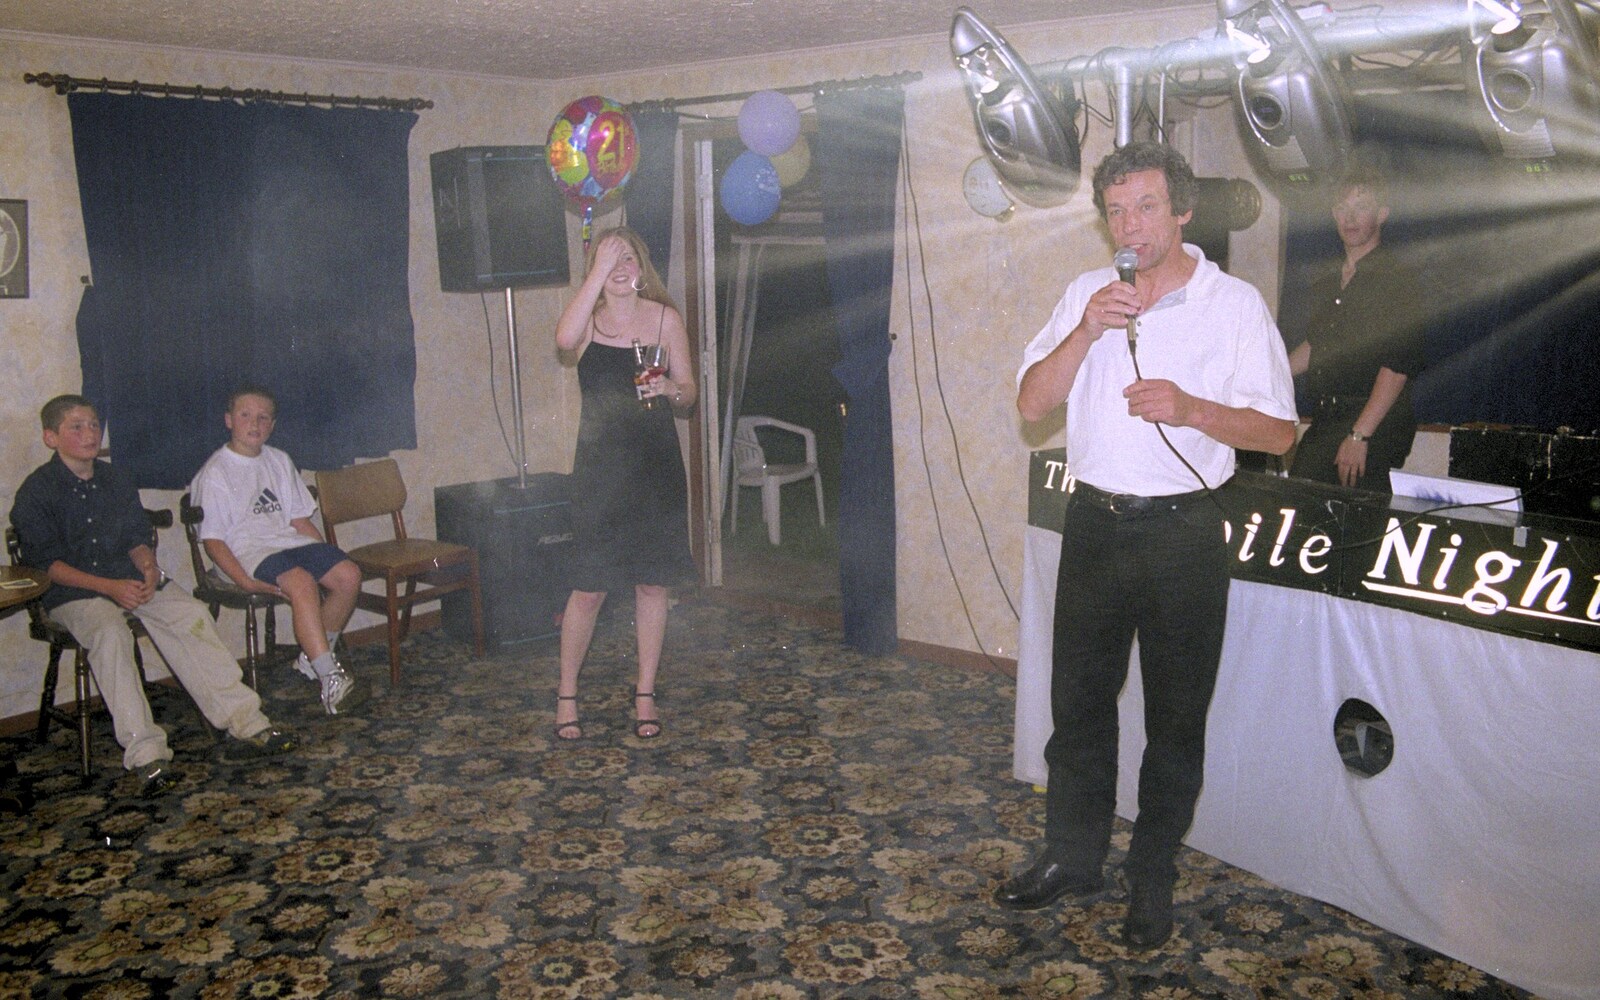 Lorraine's 21st Birthday, The Swan, Suffolk - 10th June 2000: One of Lorraine's uncles does a speech